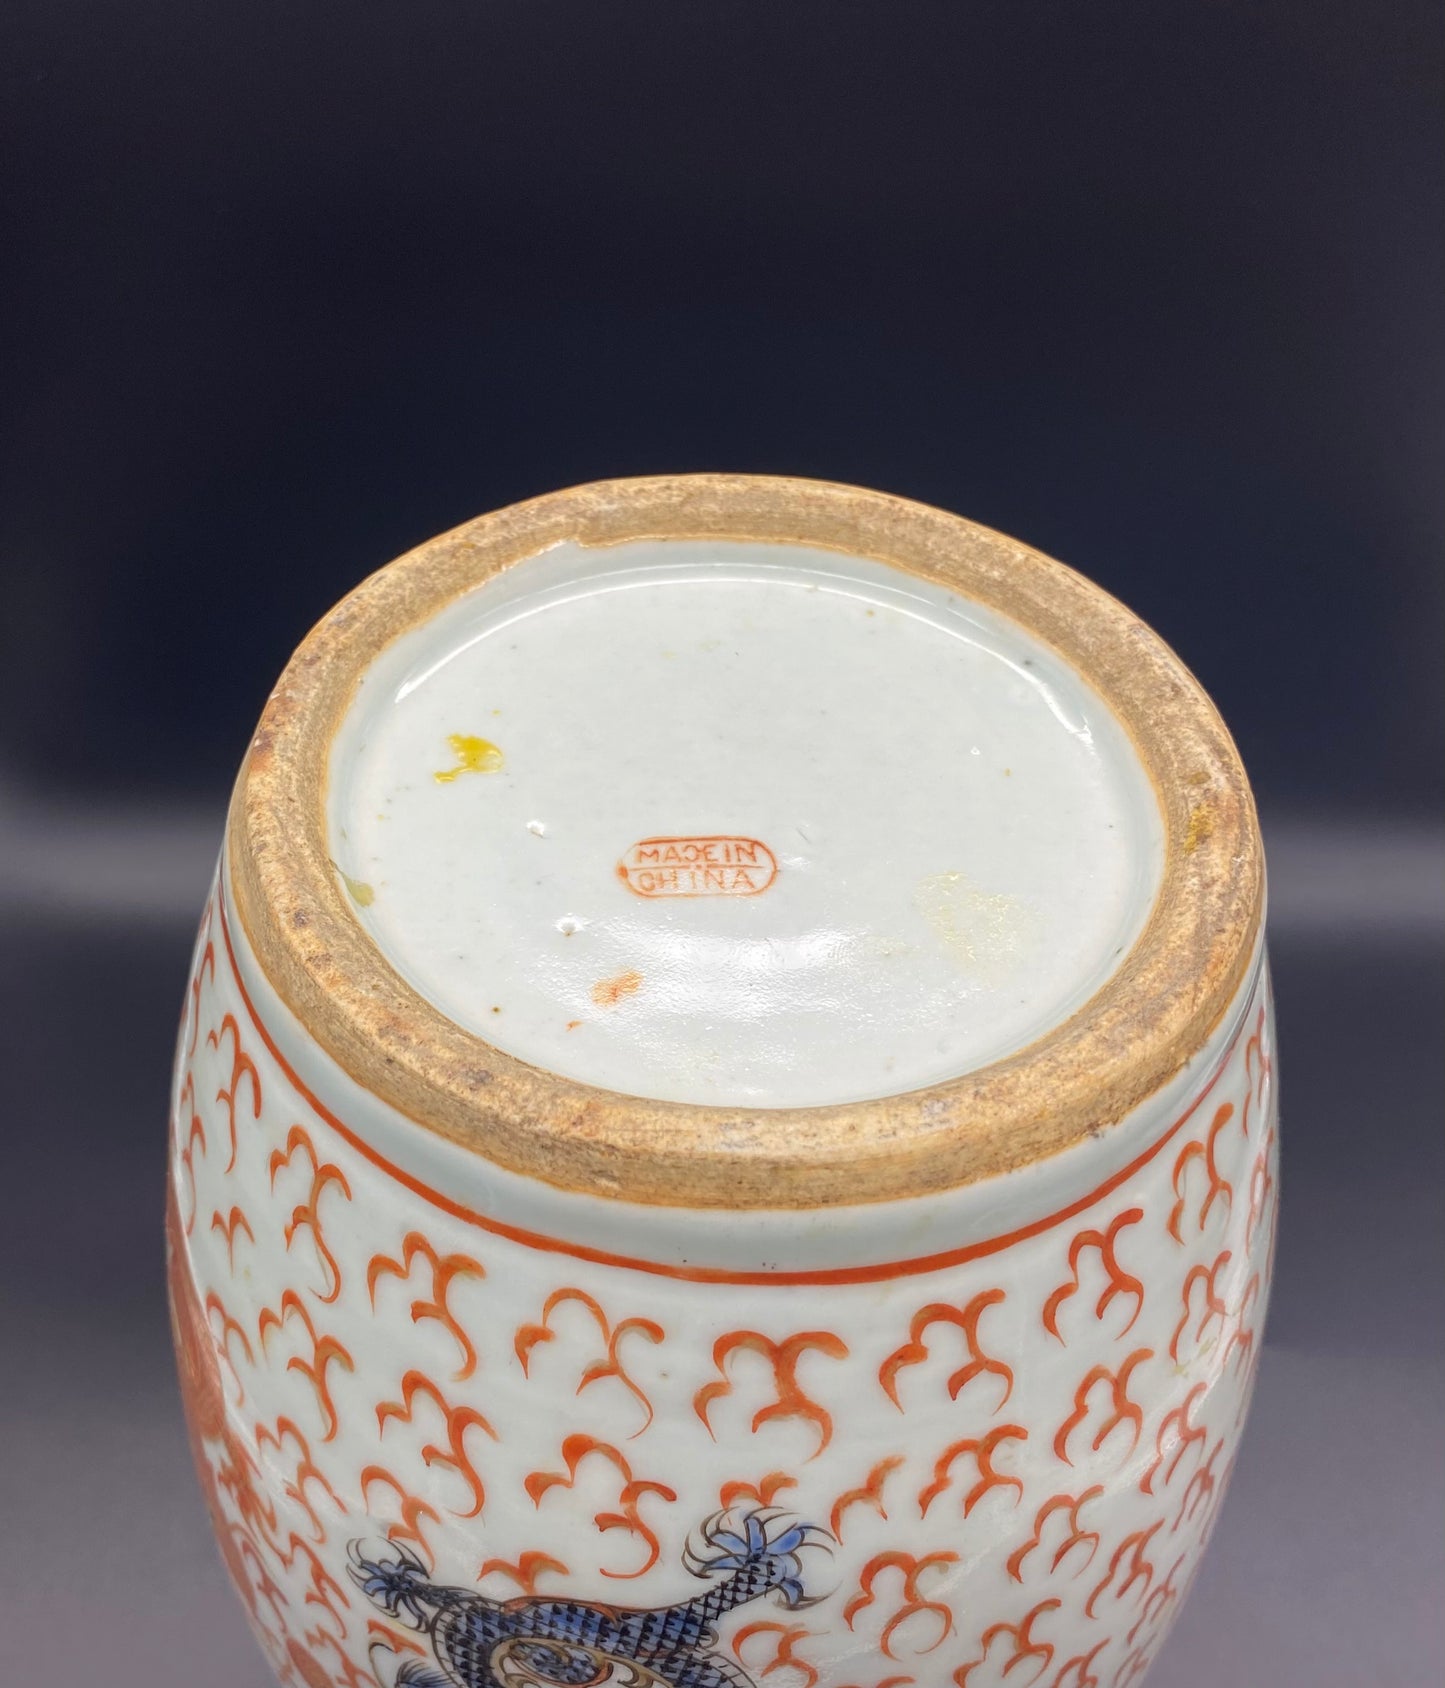 Made in china mark on Chinese porcelain vase 